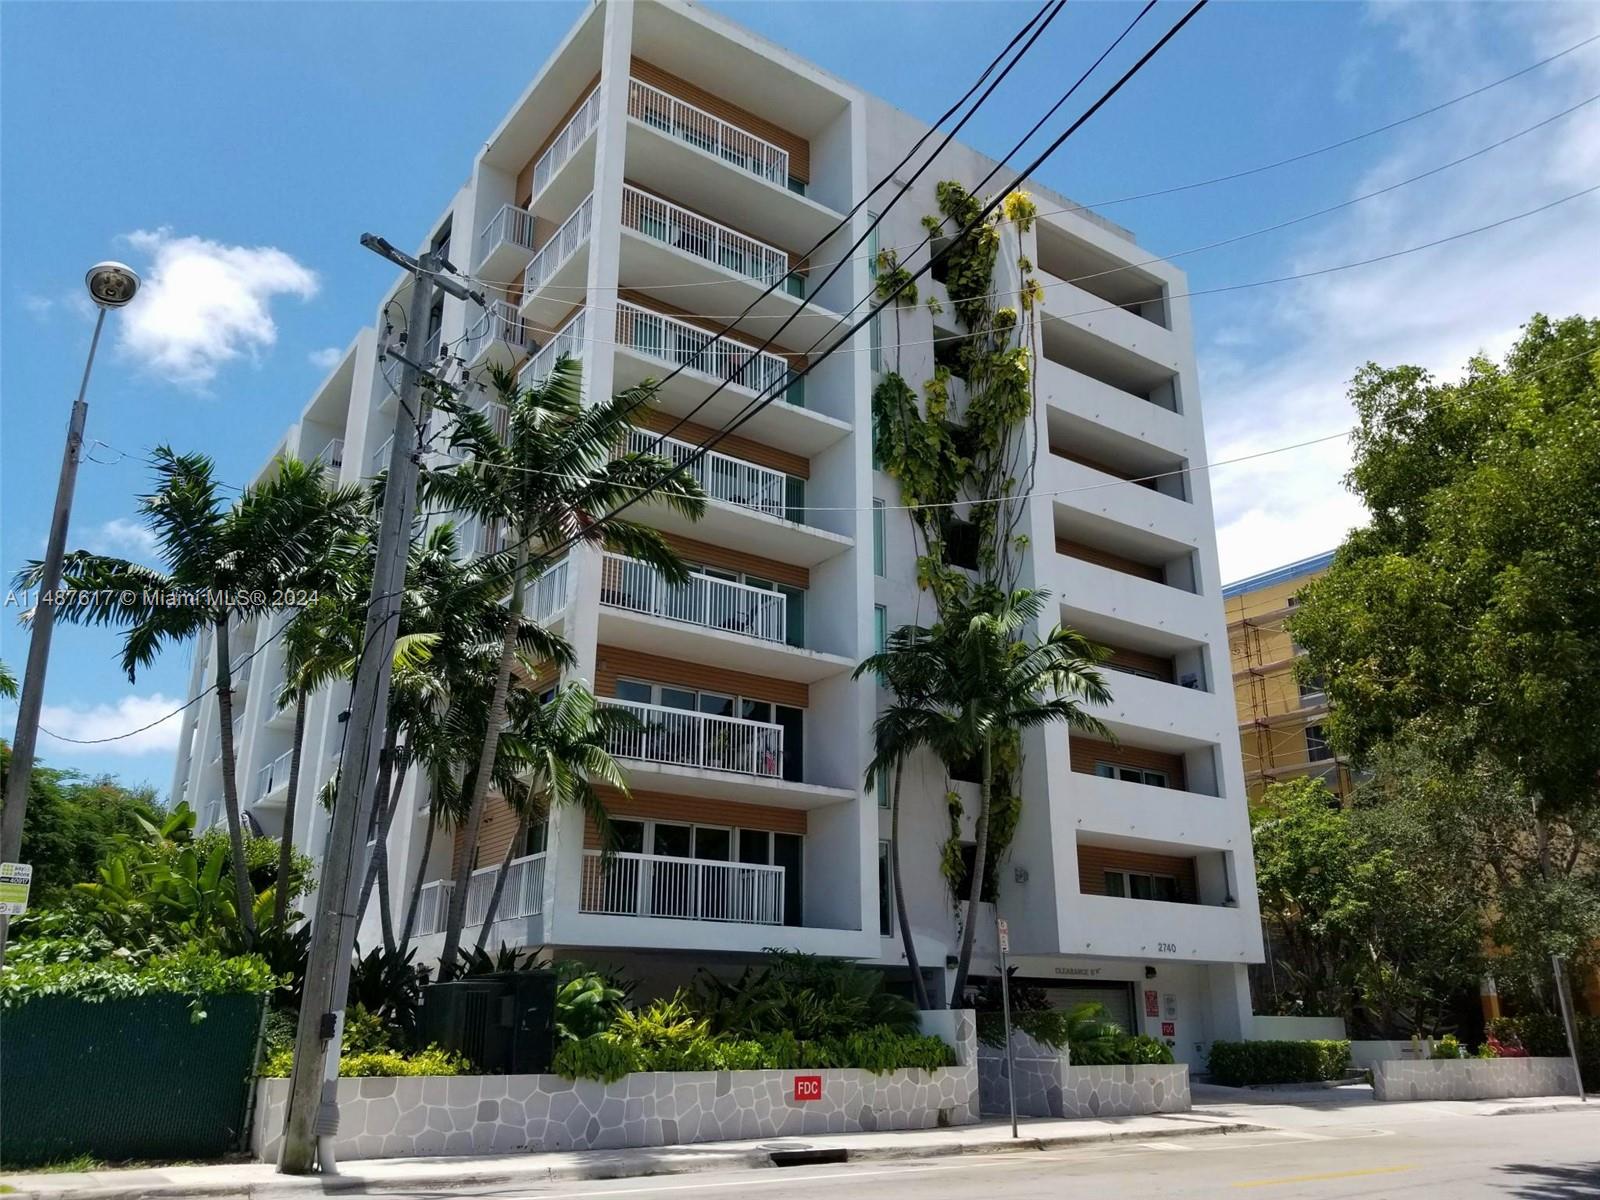 Rarely available 5th floor corner unit at Villaggio in the Grove! Located convenient to US1, Coconut Grove Metro/Grove Central, Berries in the Grove & more! This well-maintained 1/1 features a generous kitchen w/complete appliance set, granite counter tops & eat-in bar. Kitchen is open to a light & bright living area which leads to a large balcony looking into the Grove. Enjoy incredible sunrise views from this private outdoor living space. This 5th floor corner unit, in building's quietest line, shares no party walls w/neighbors. Rarely used convenient interior staircase nearby. Villaggio in the Grove also offers community amenities including gym, rooftop pool w/lounging areas, gated entry, intercom entry + gated & assigned parking. Unit rented at $2400/mth. Lease ends 1/31/2024